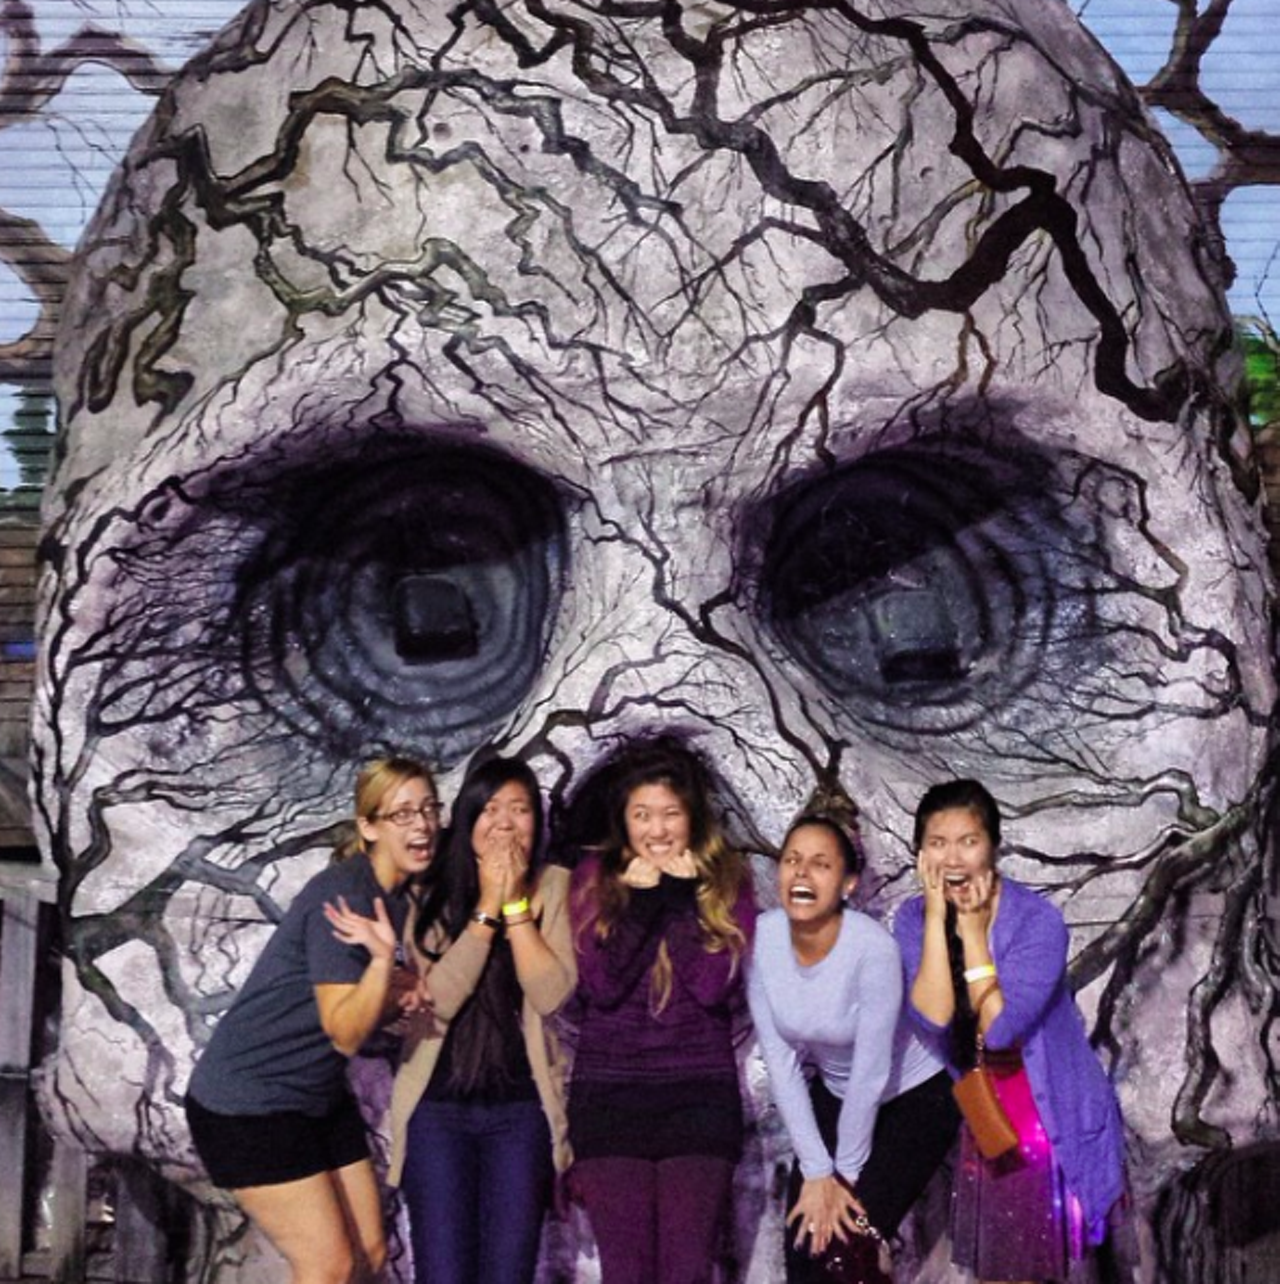 Nightmare on the Bayou
515 Studemont St., Houston, (713) 868-3344, nightmareonthebayou.com
Take a road trip out to Houston to enjoy one of the city’s scariest haunted houses. This year’s attractions include Ghost House and Bayou Cemetery for extra creepy scares.
Photo via Instagram, kimkimvu